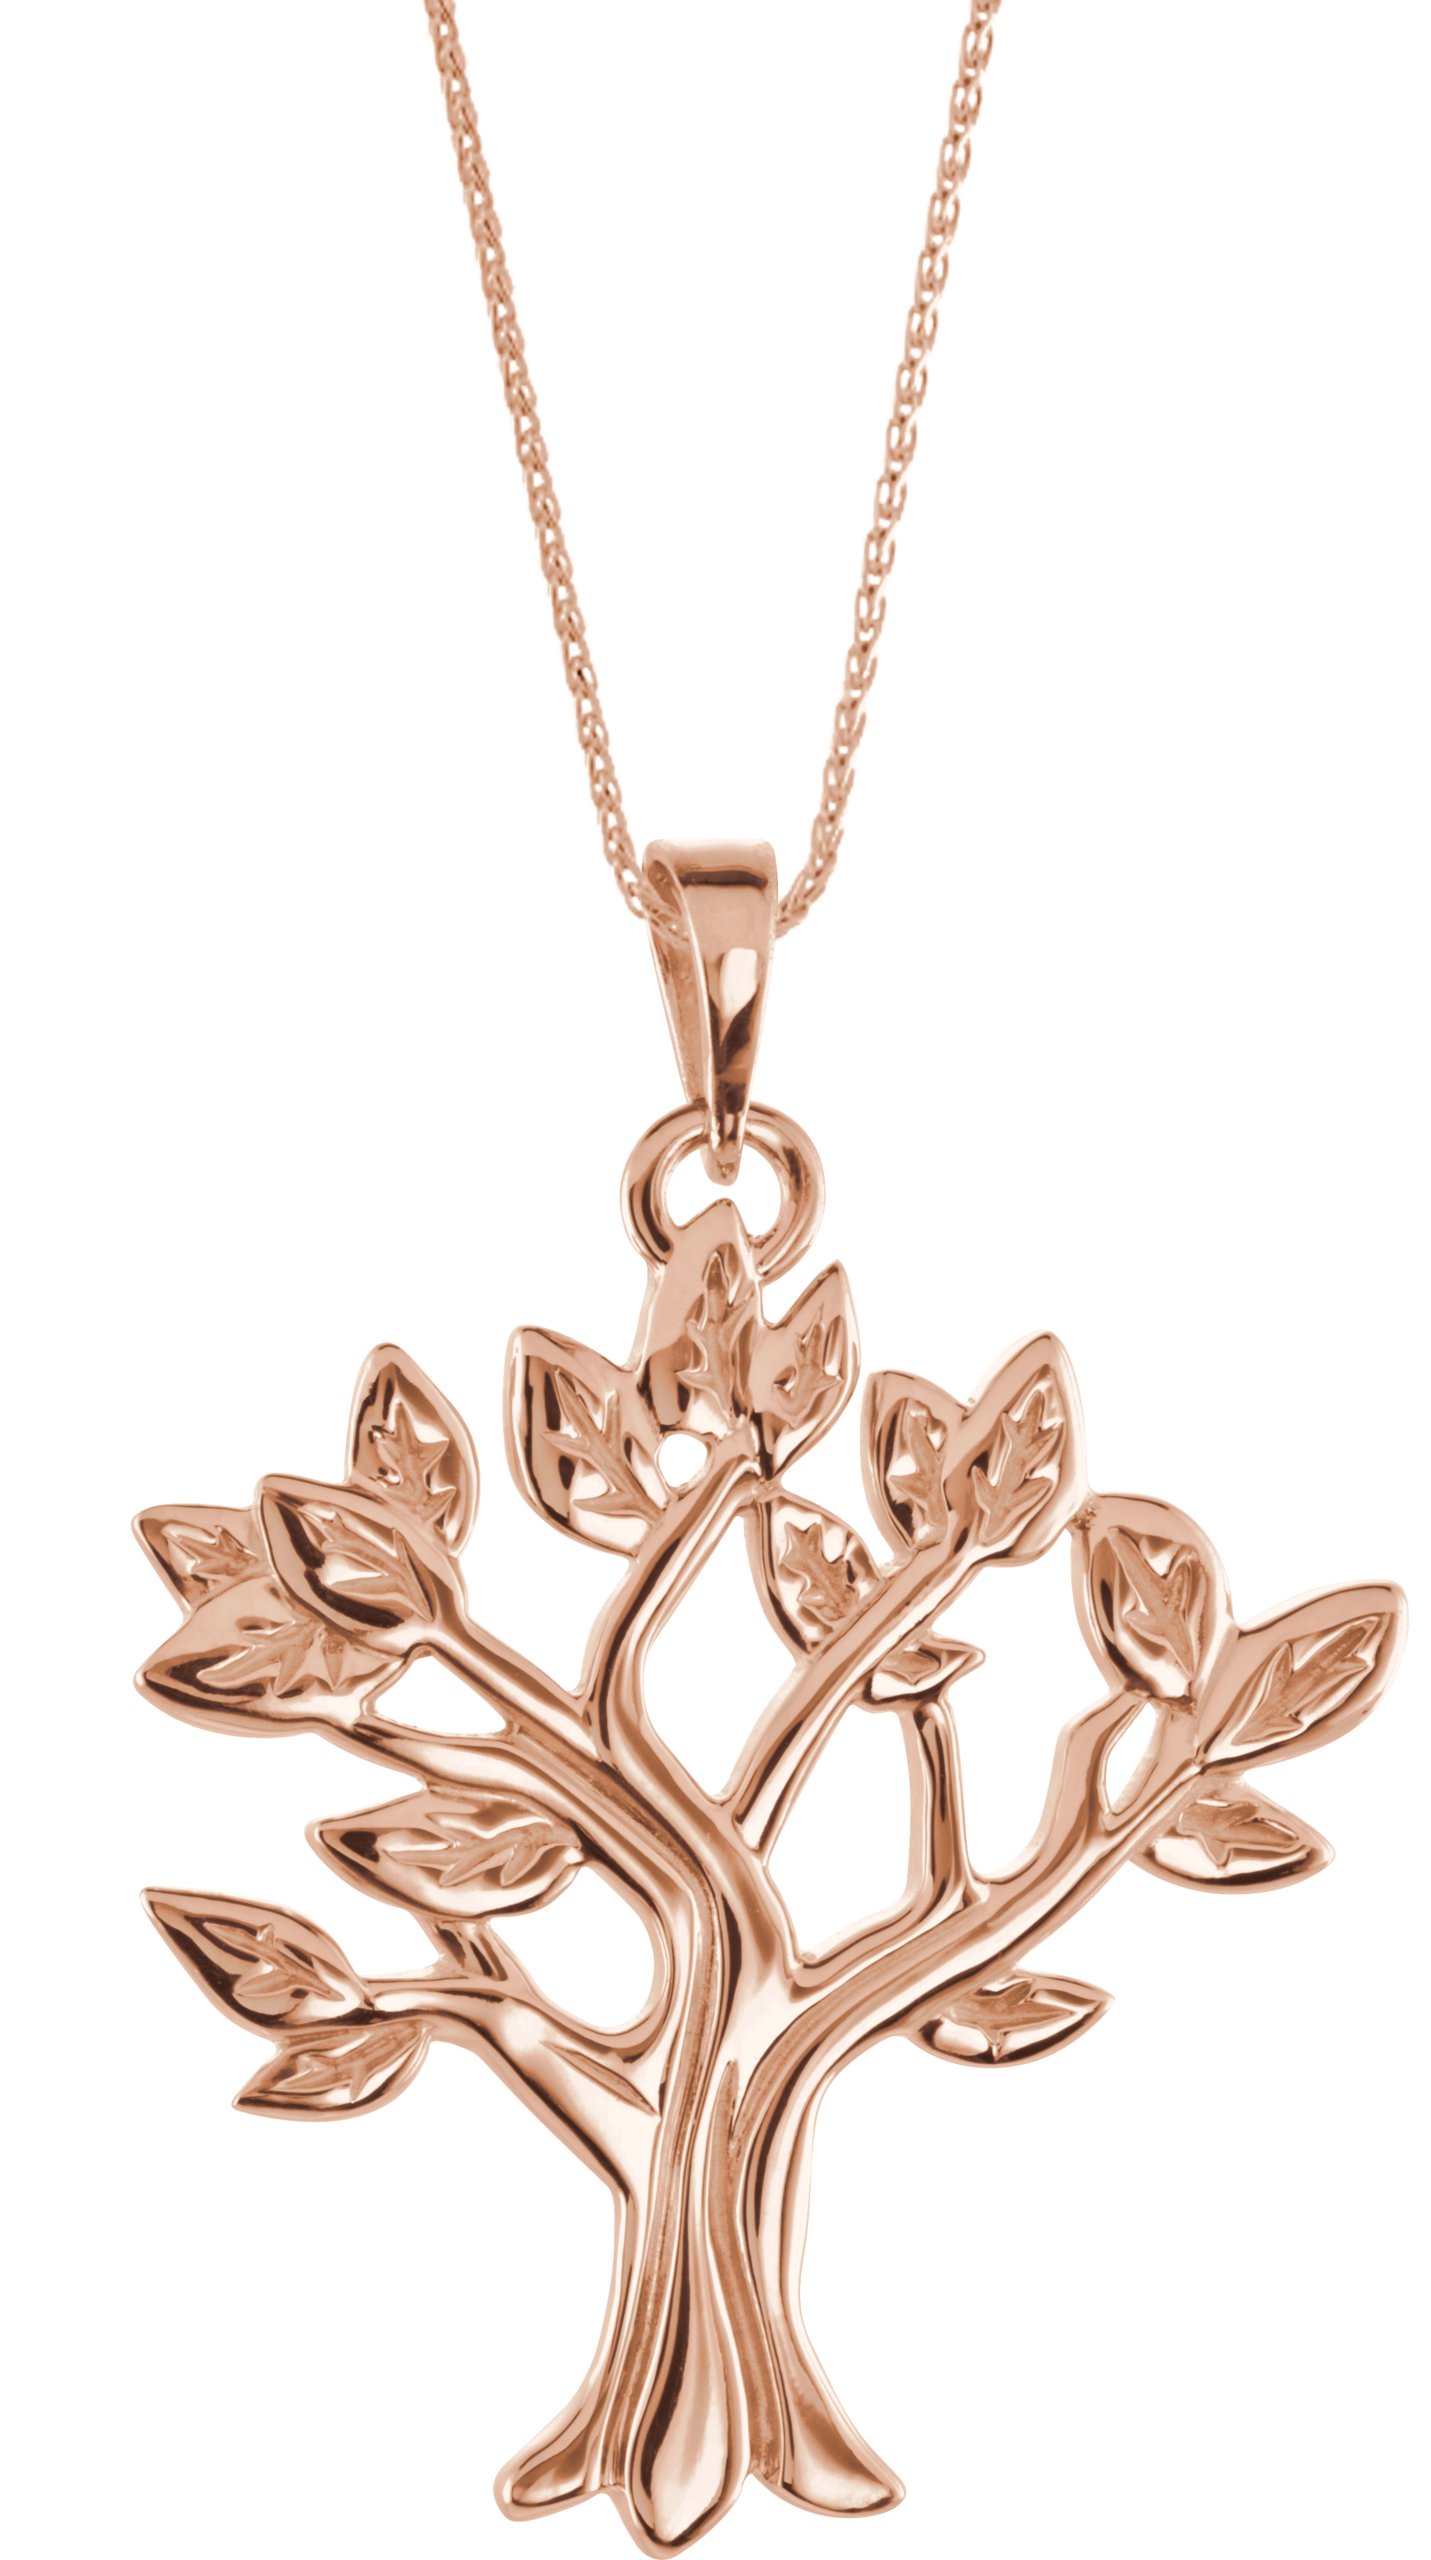 10K Rose My Tree Family 16 18 inch Necklace Ref. 16681638